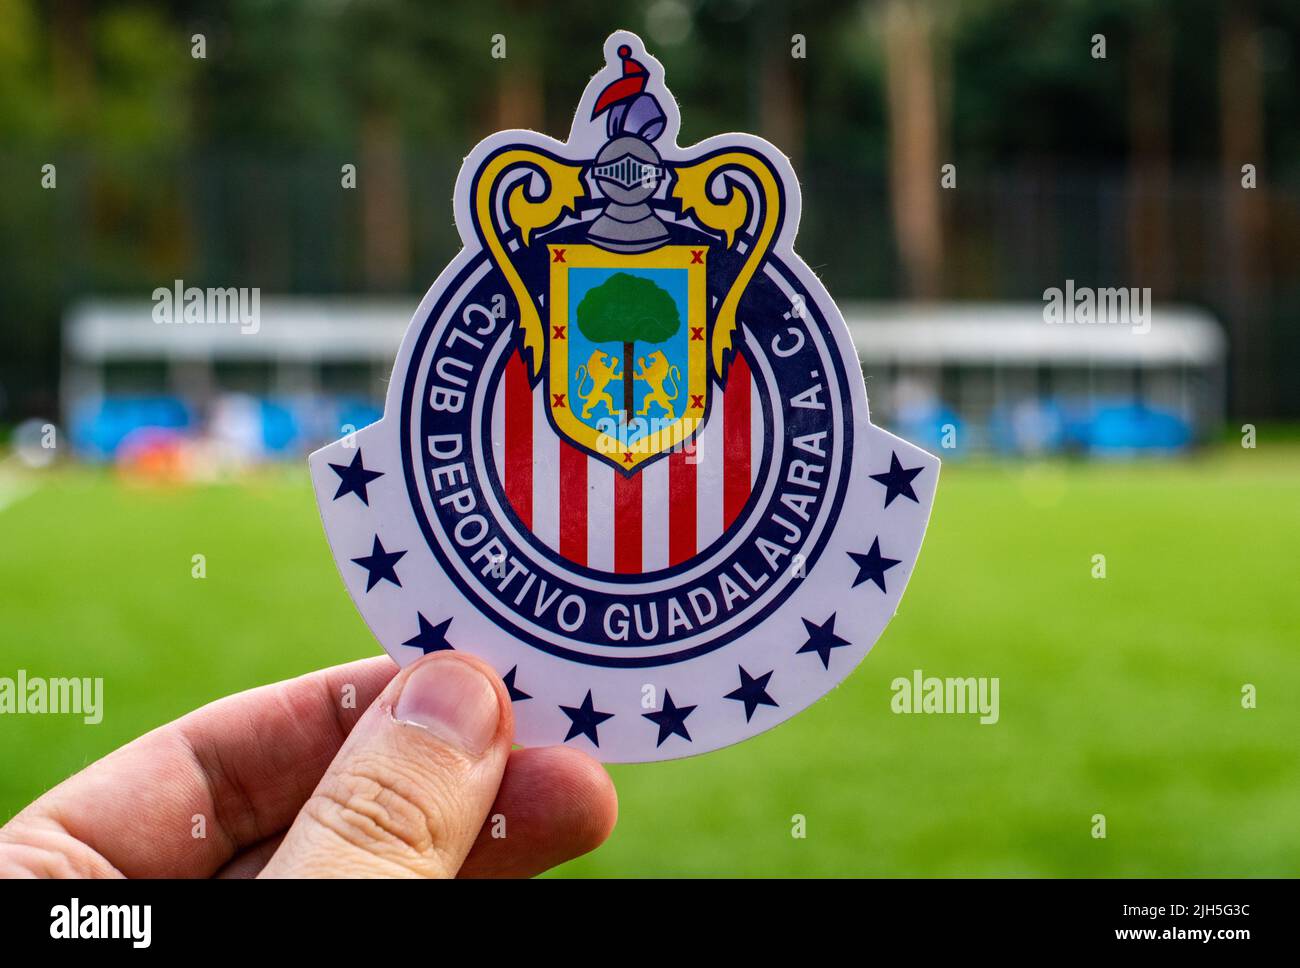 August 30, 2021, Moscow, Russia. The emblem of the football club Deportivo Guadalajara on the background of the green lawn of the stadium. Stock Photo